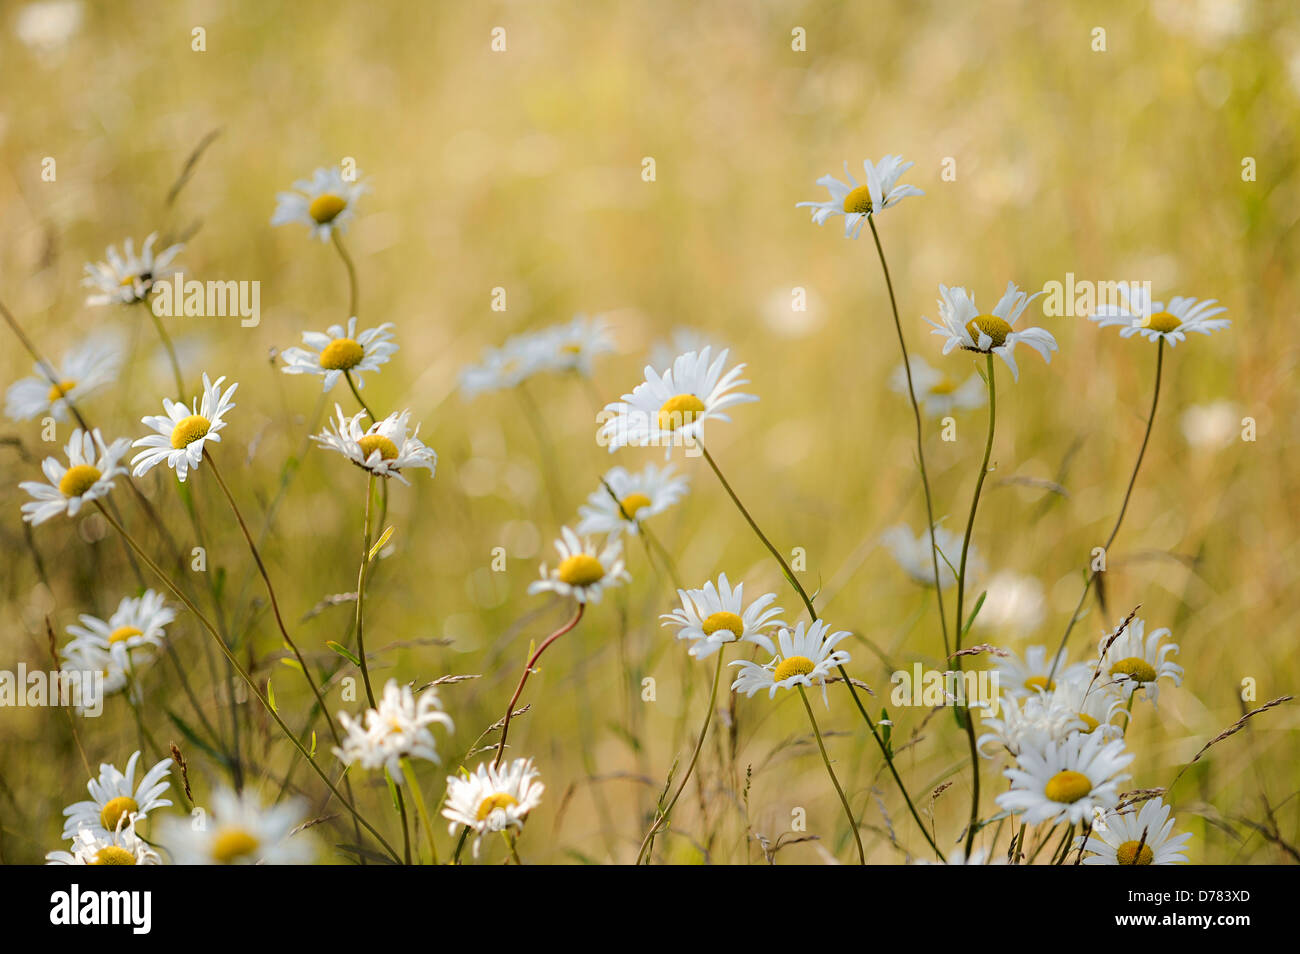 Ox-eye daisies growing together. Stock Photo